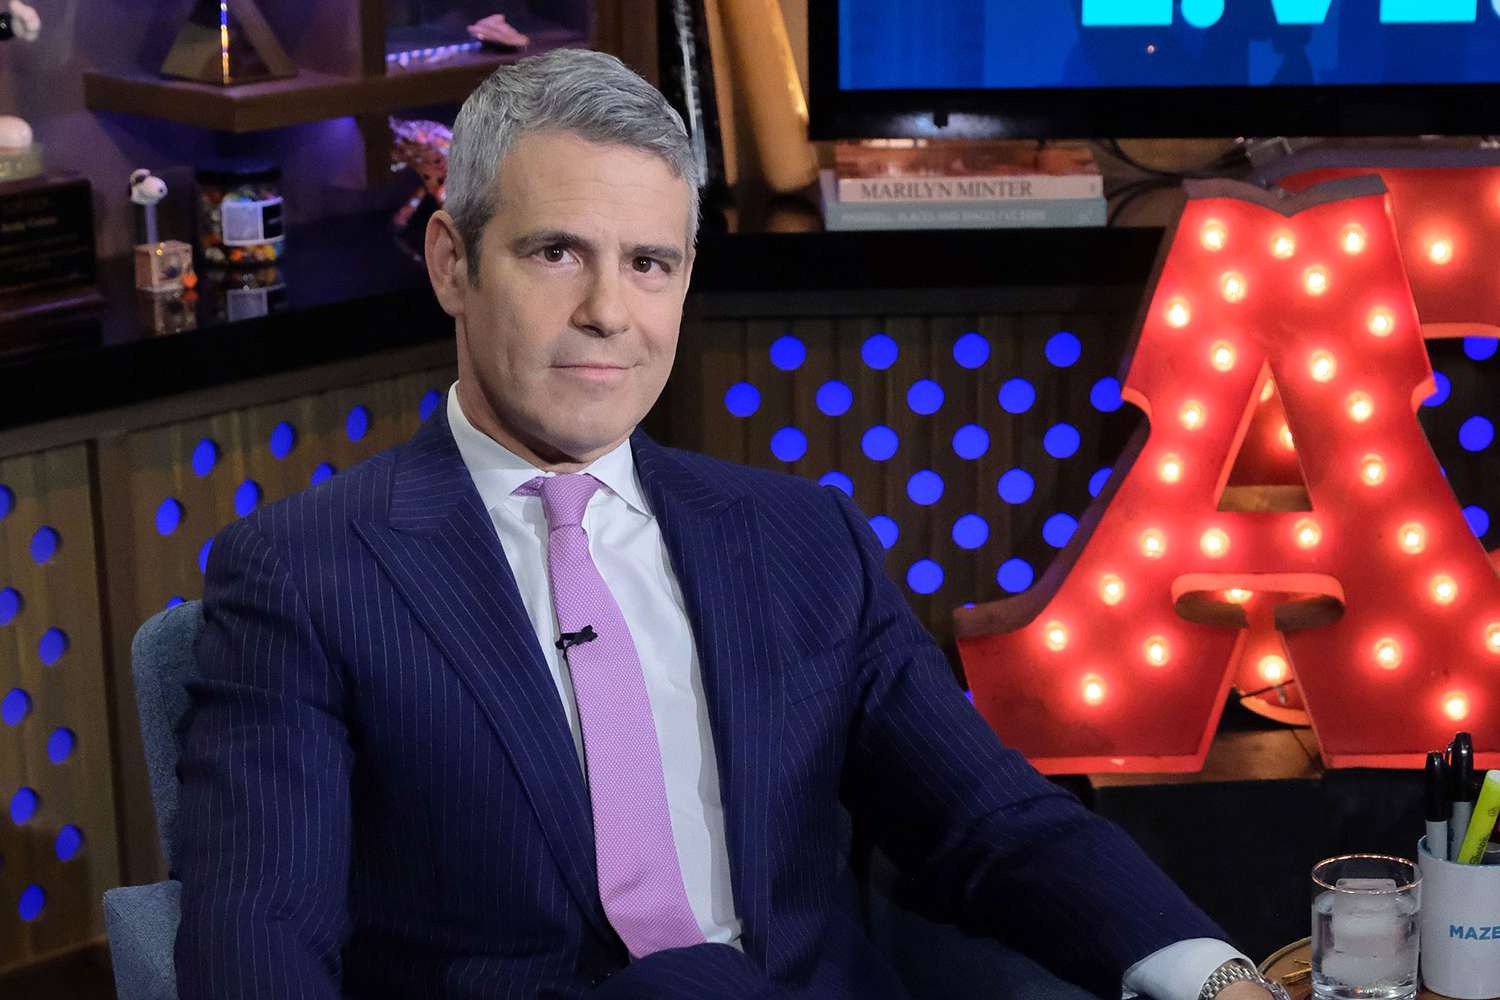 Watch What Happens Live With Andy Cohen